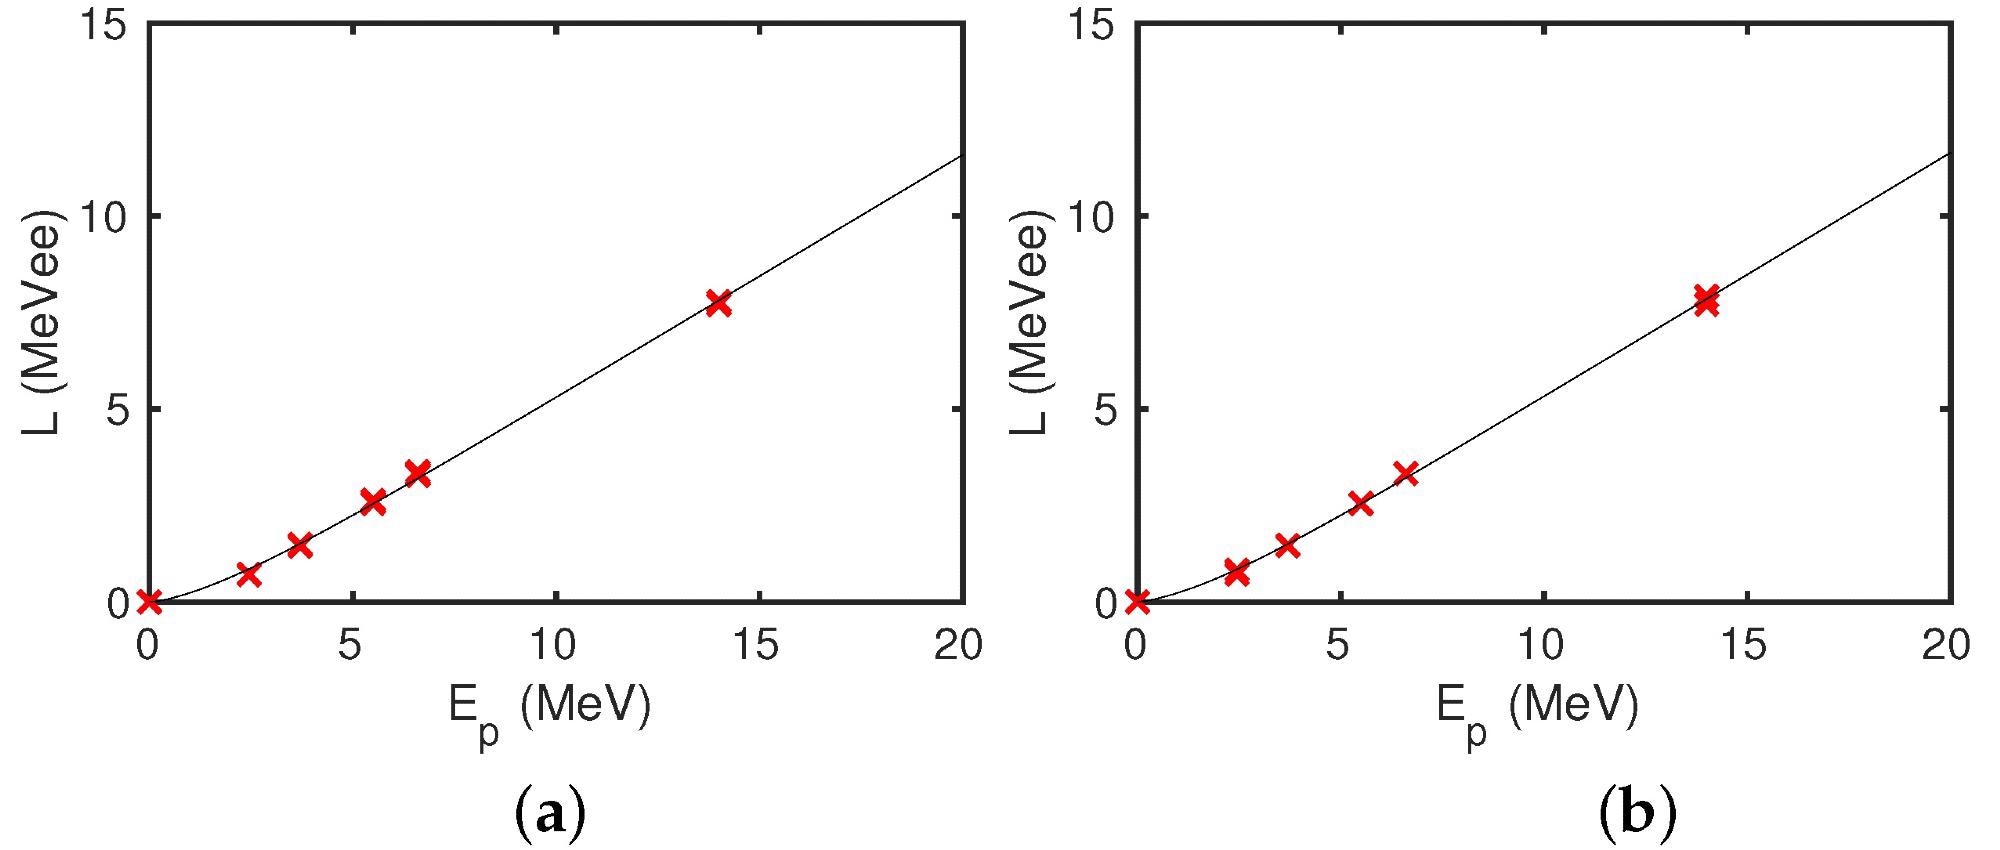 Light output function for all measurements detected using a 1-inch (a) PYR5/DIPN scintillator, and (b) THIO5/DIPN scintillator. The data points are completed with fit functions for each scintillator.